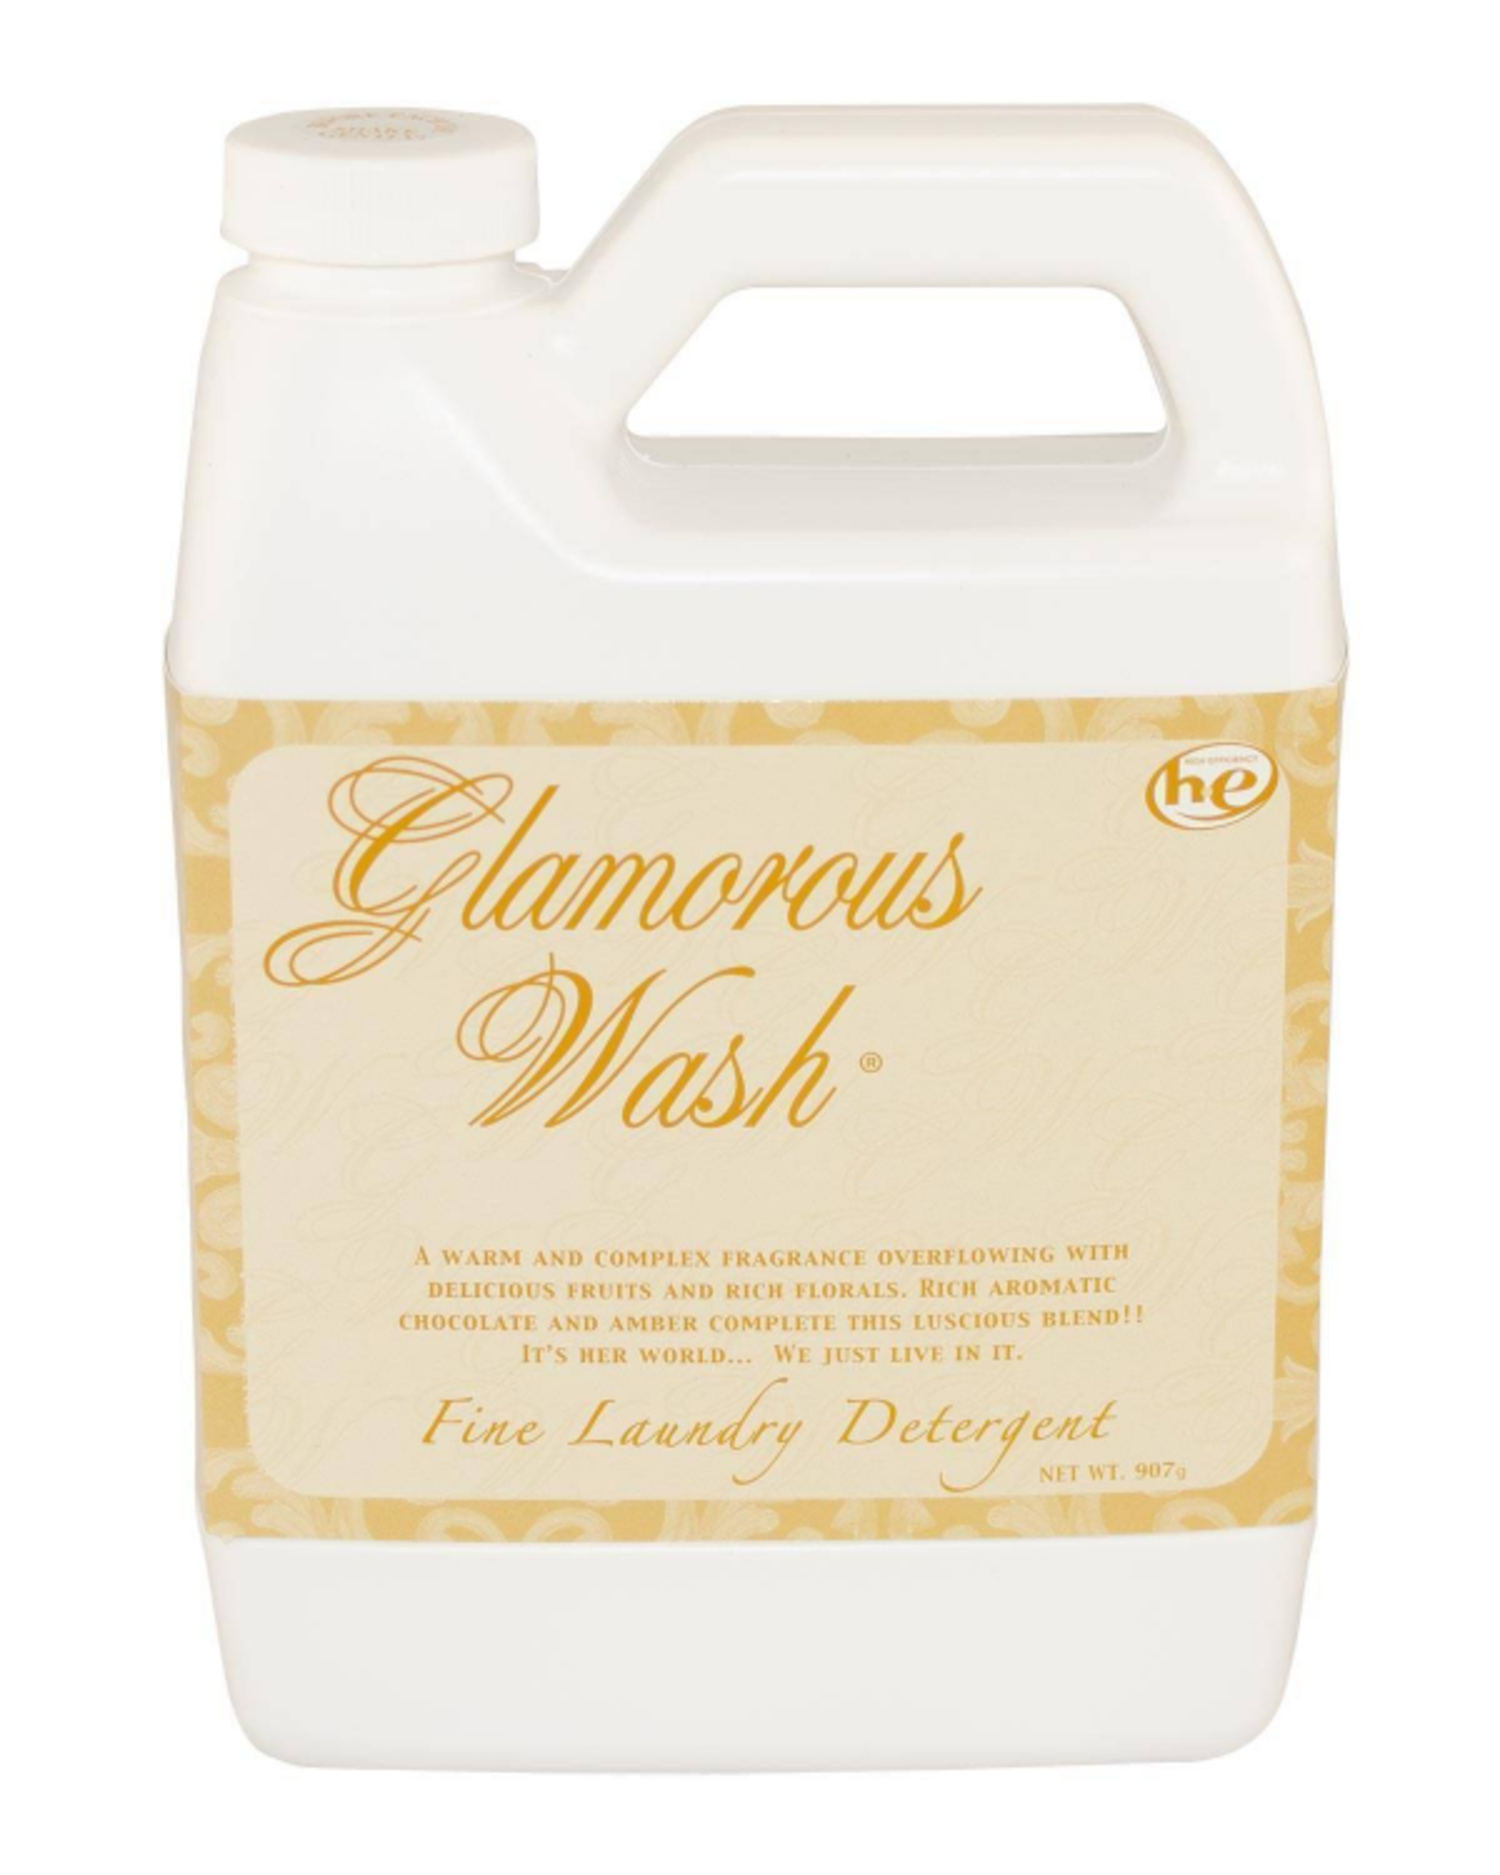 Diva” Glam Wash Laundry Detergent – Tyler - Be Made